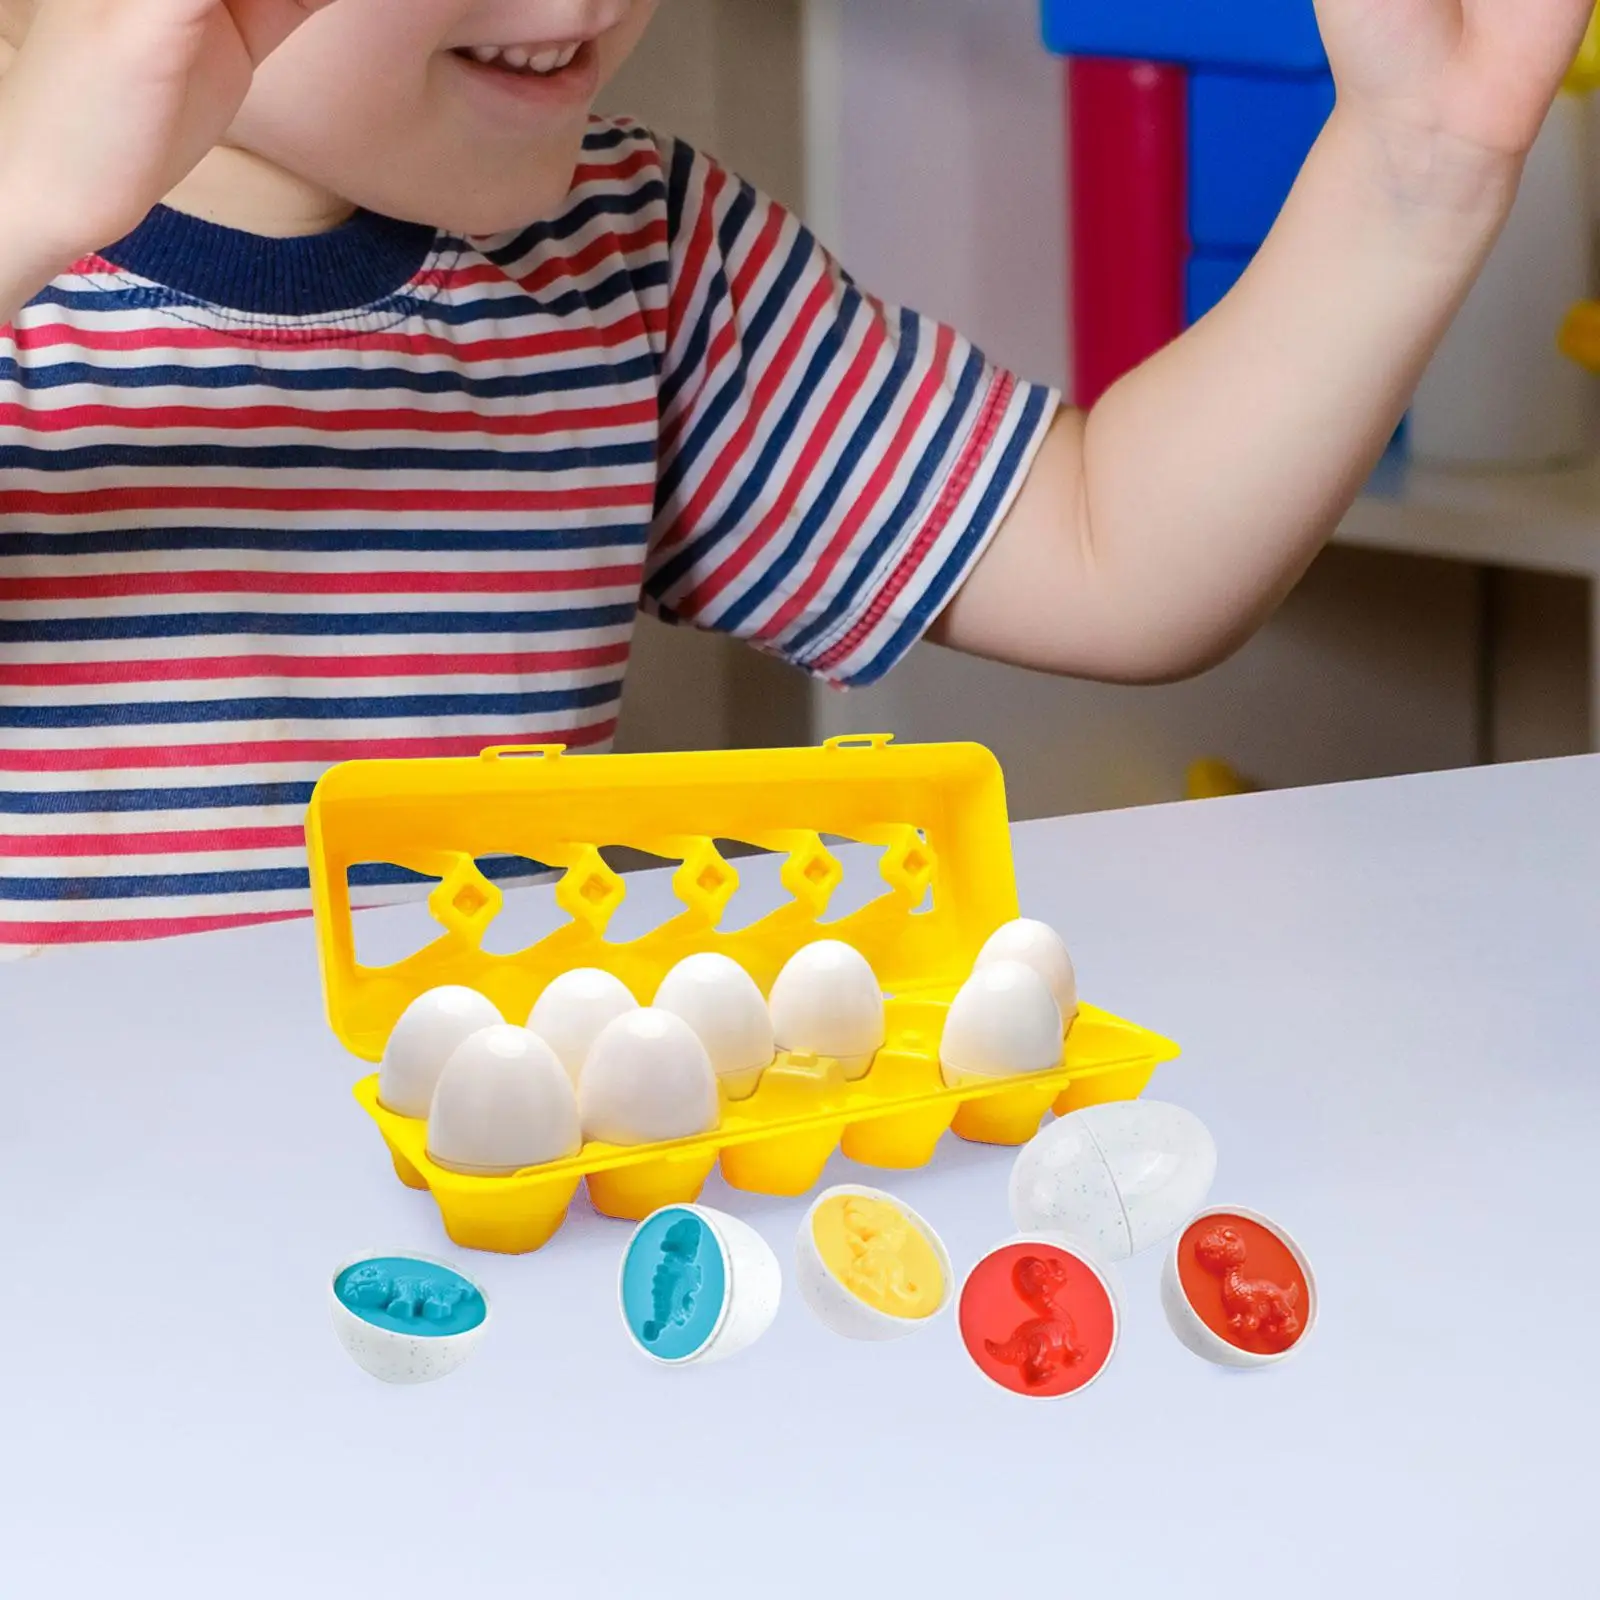 12Pcs Matching Egg Play Set Sensory Toy Sorter Puzzle Toys for Infant Easter Basket Gift 3 4 5 6 Years Old Babies Children